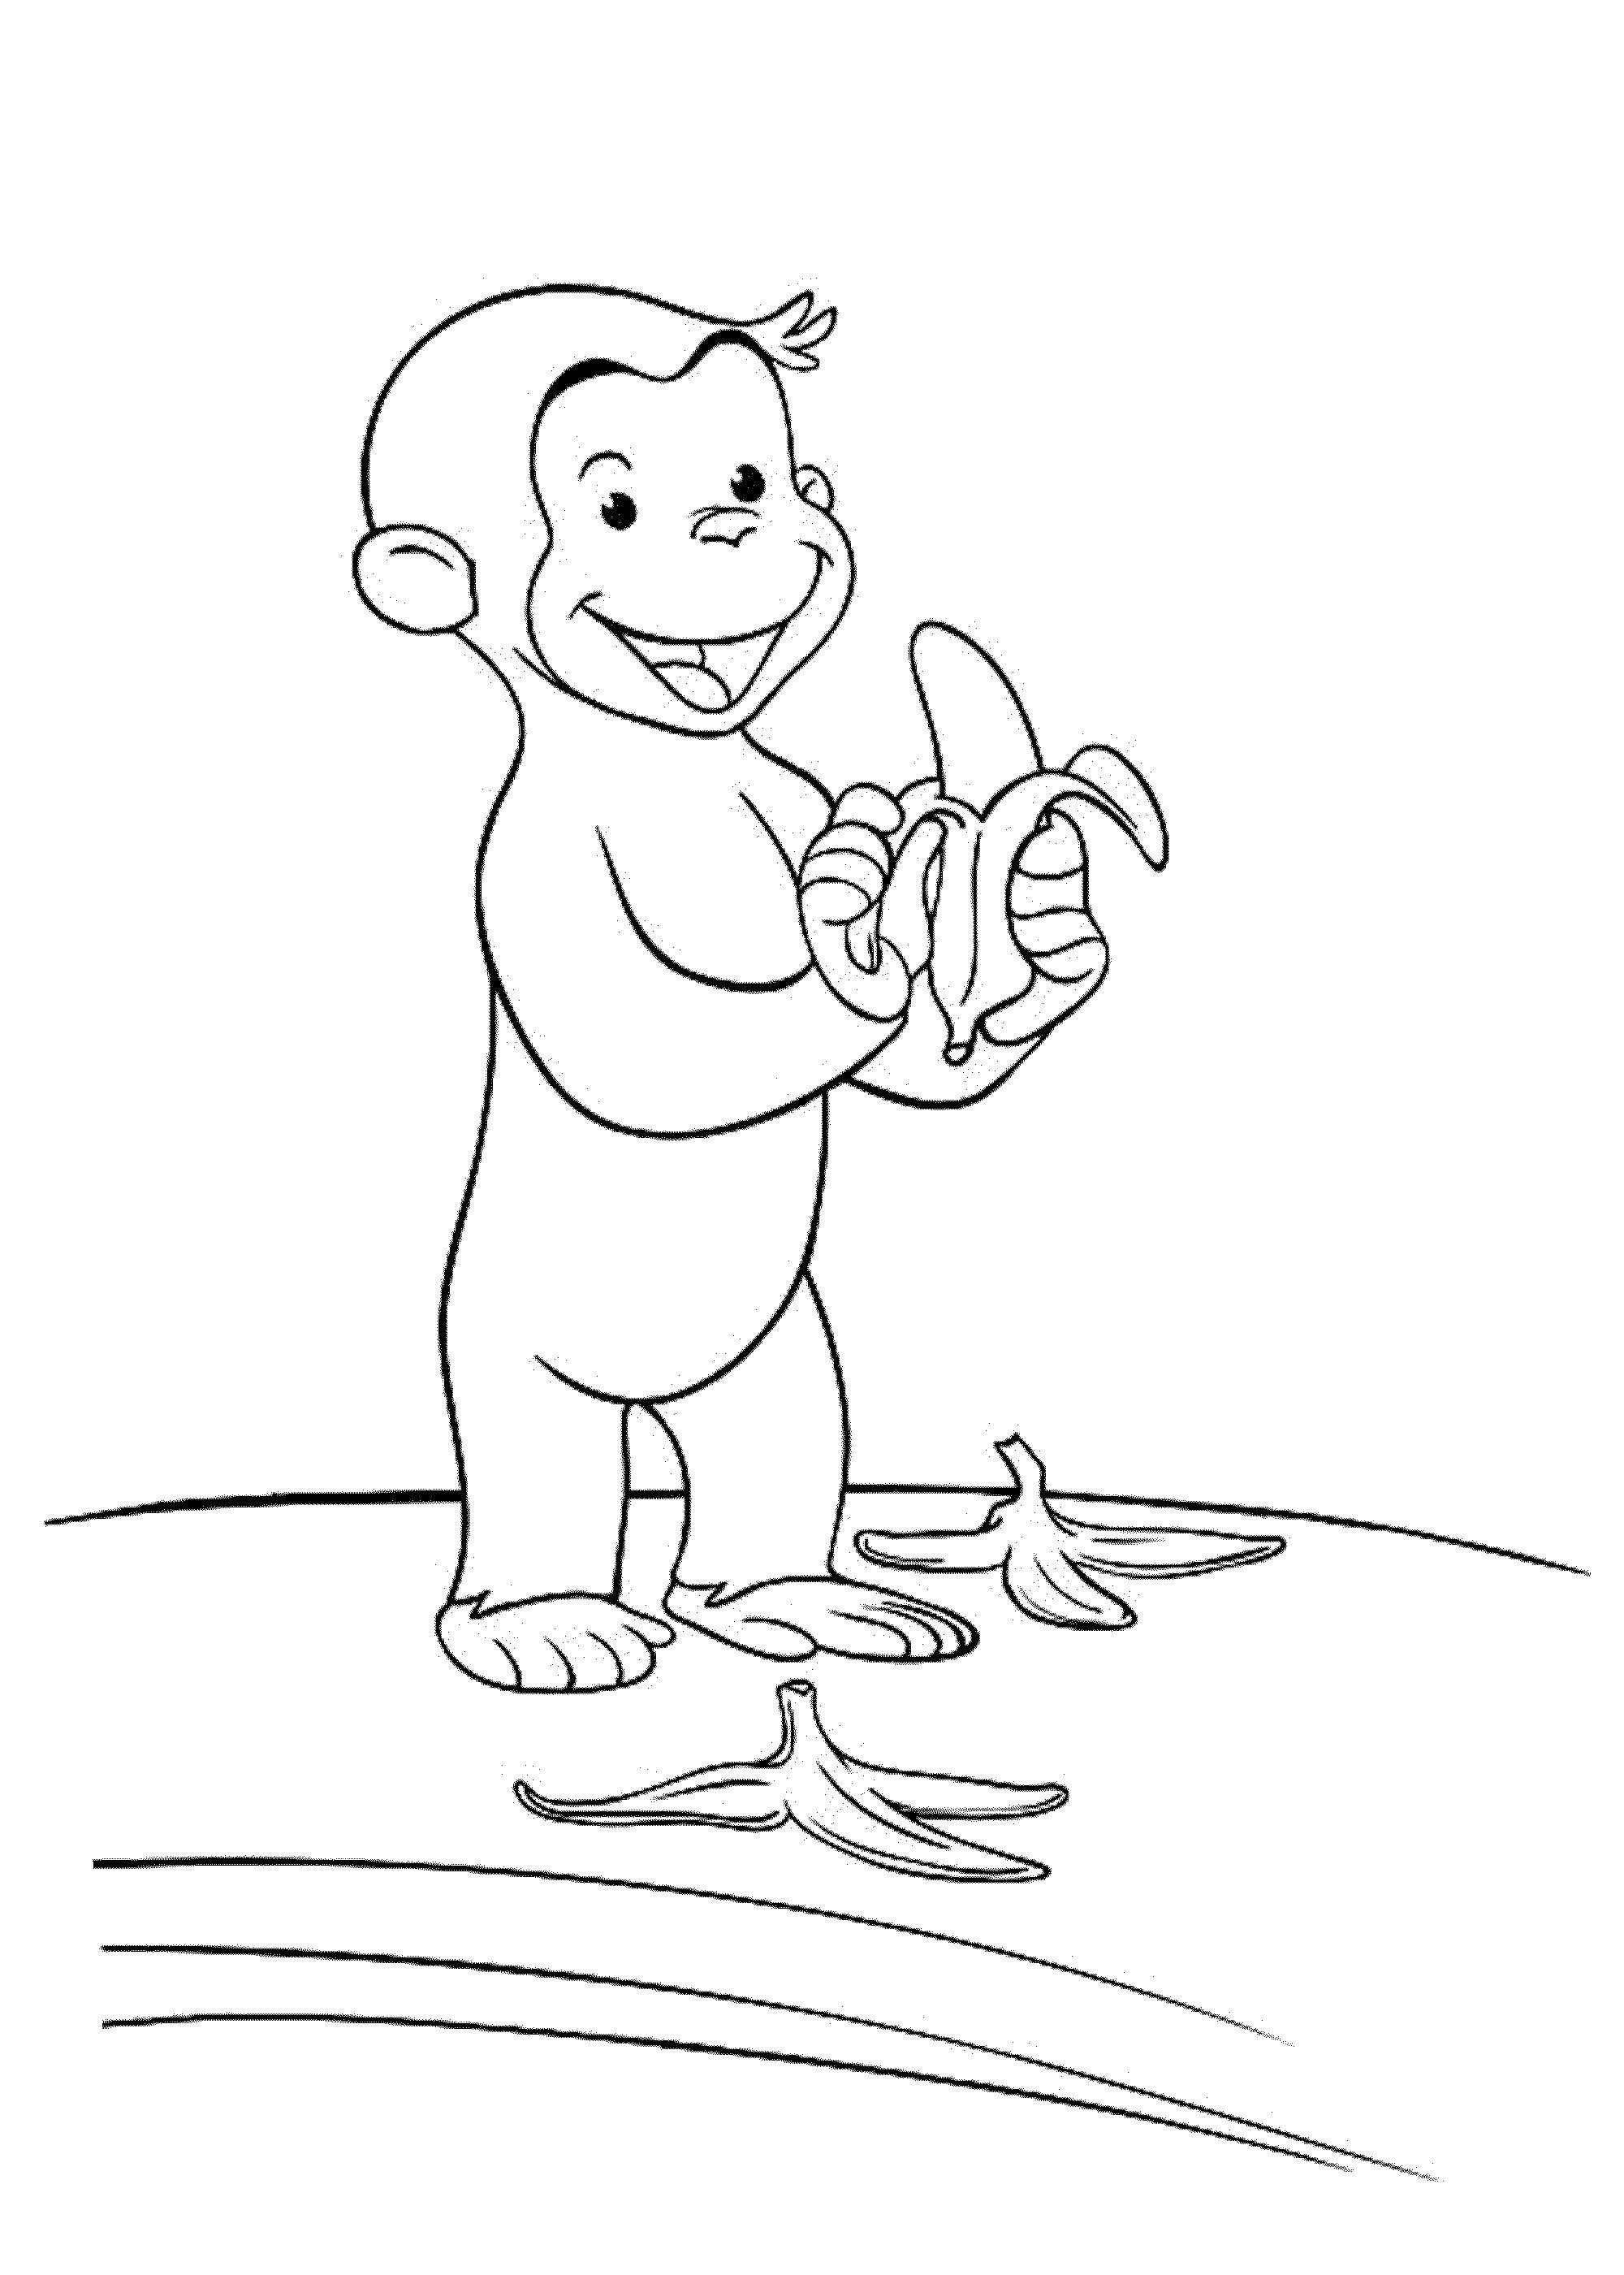 Coloring Monkey cleans the bananas. Category coloring. Tags:  Cartoon character.